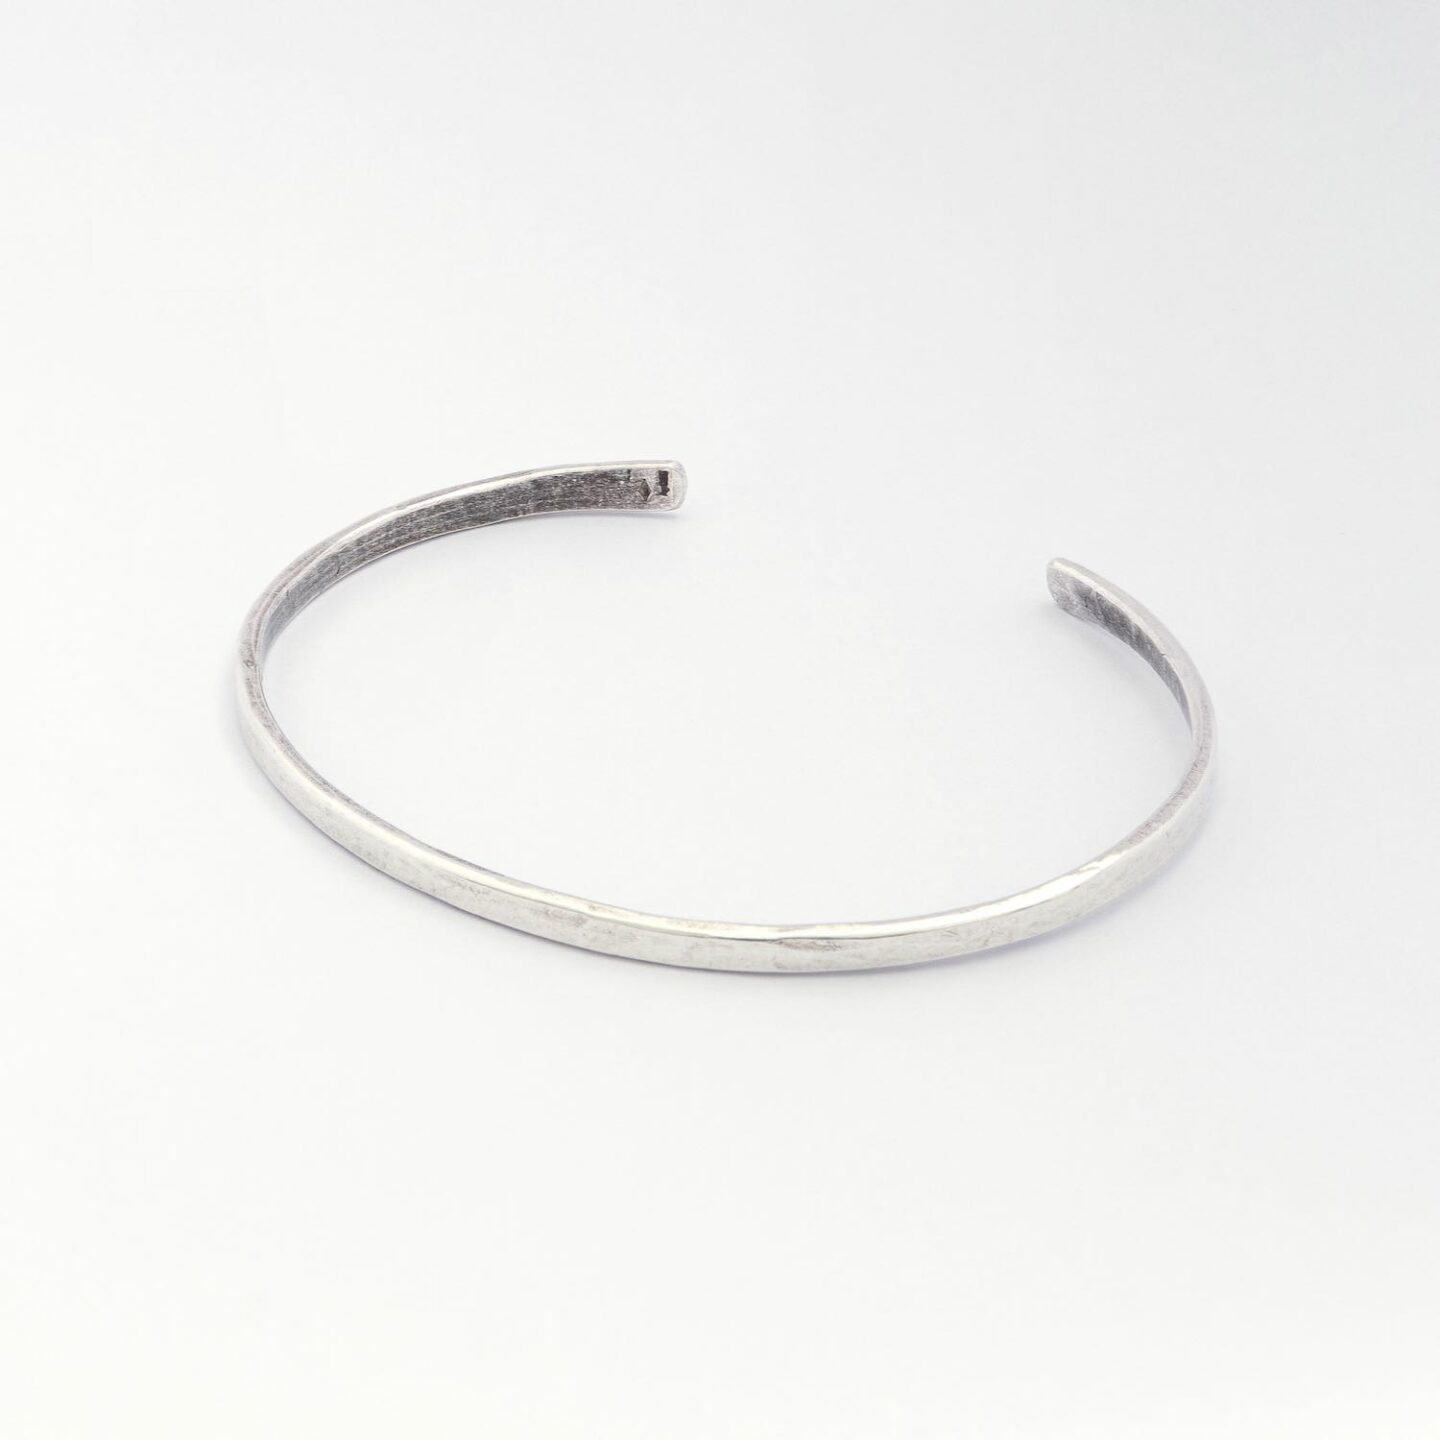 gilbert-gilbert-by-boras-bracelet-argent-damaged-collection-taille-small